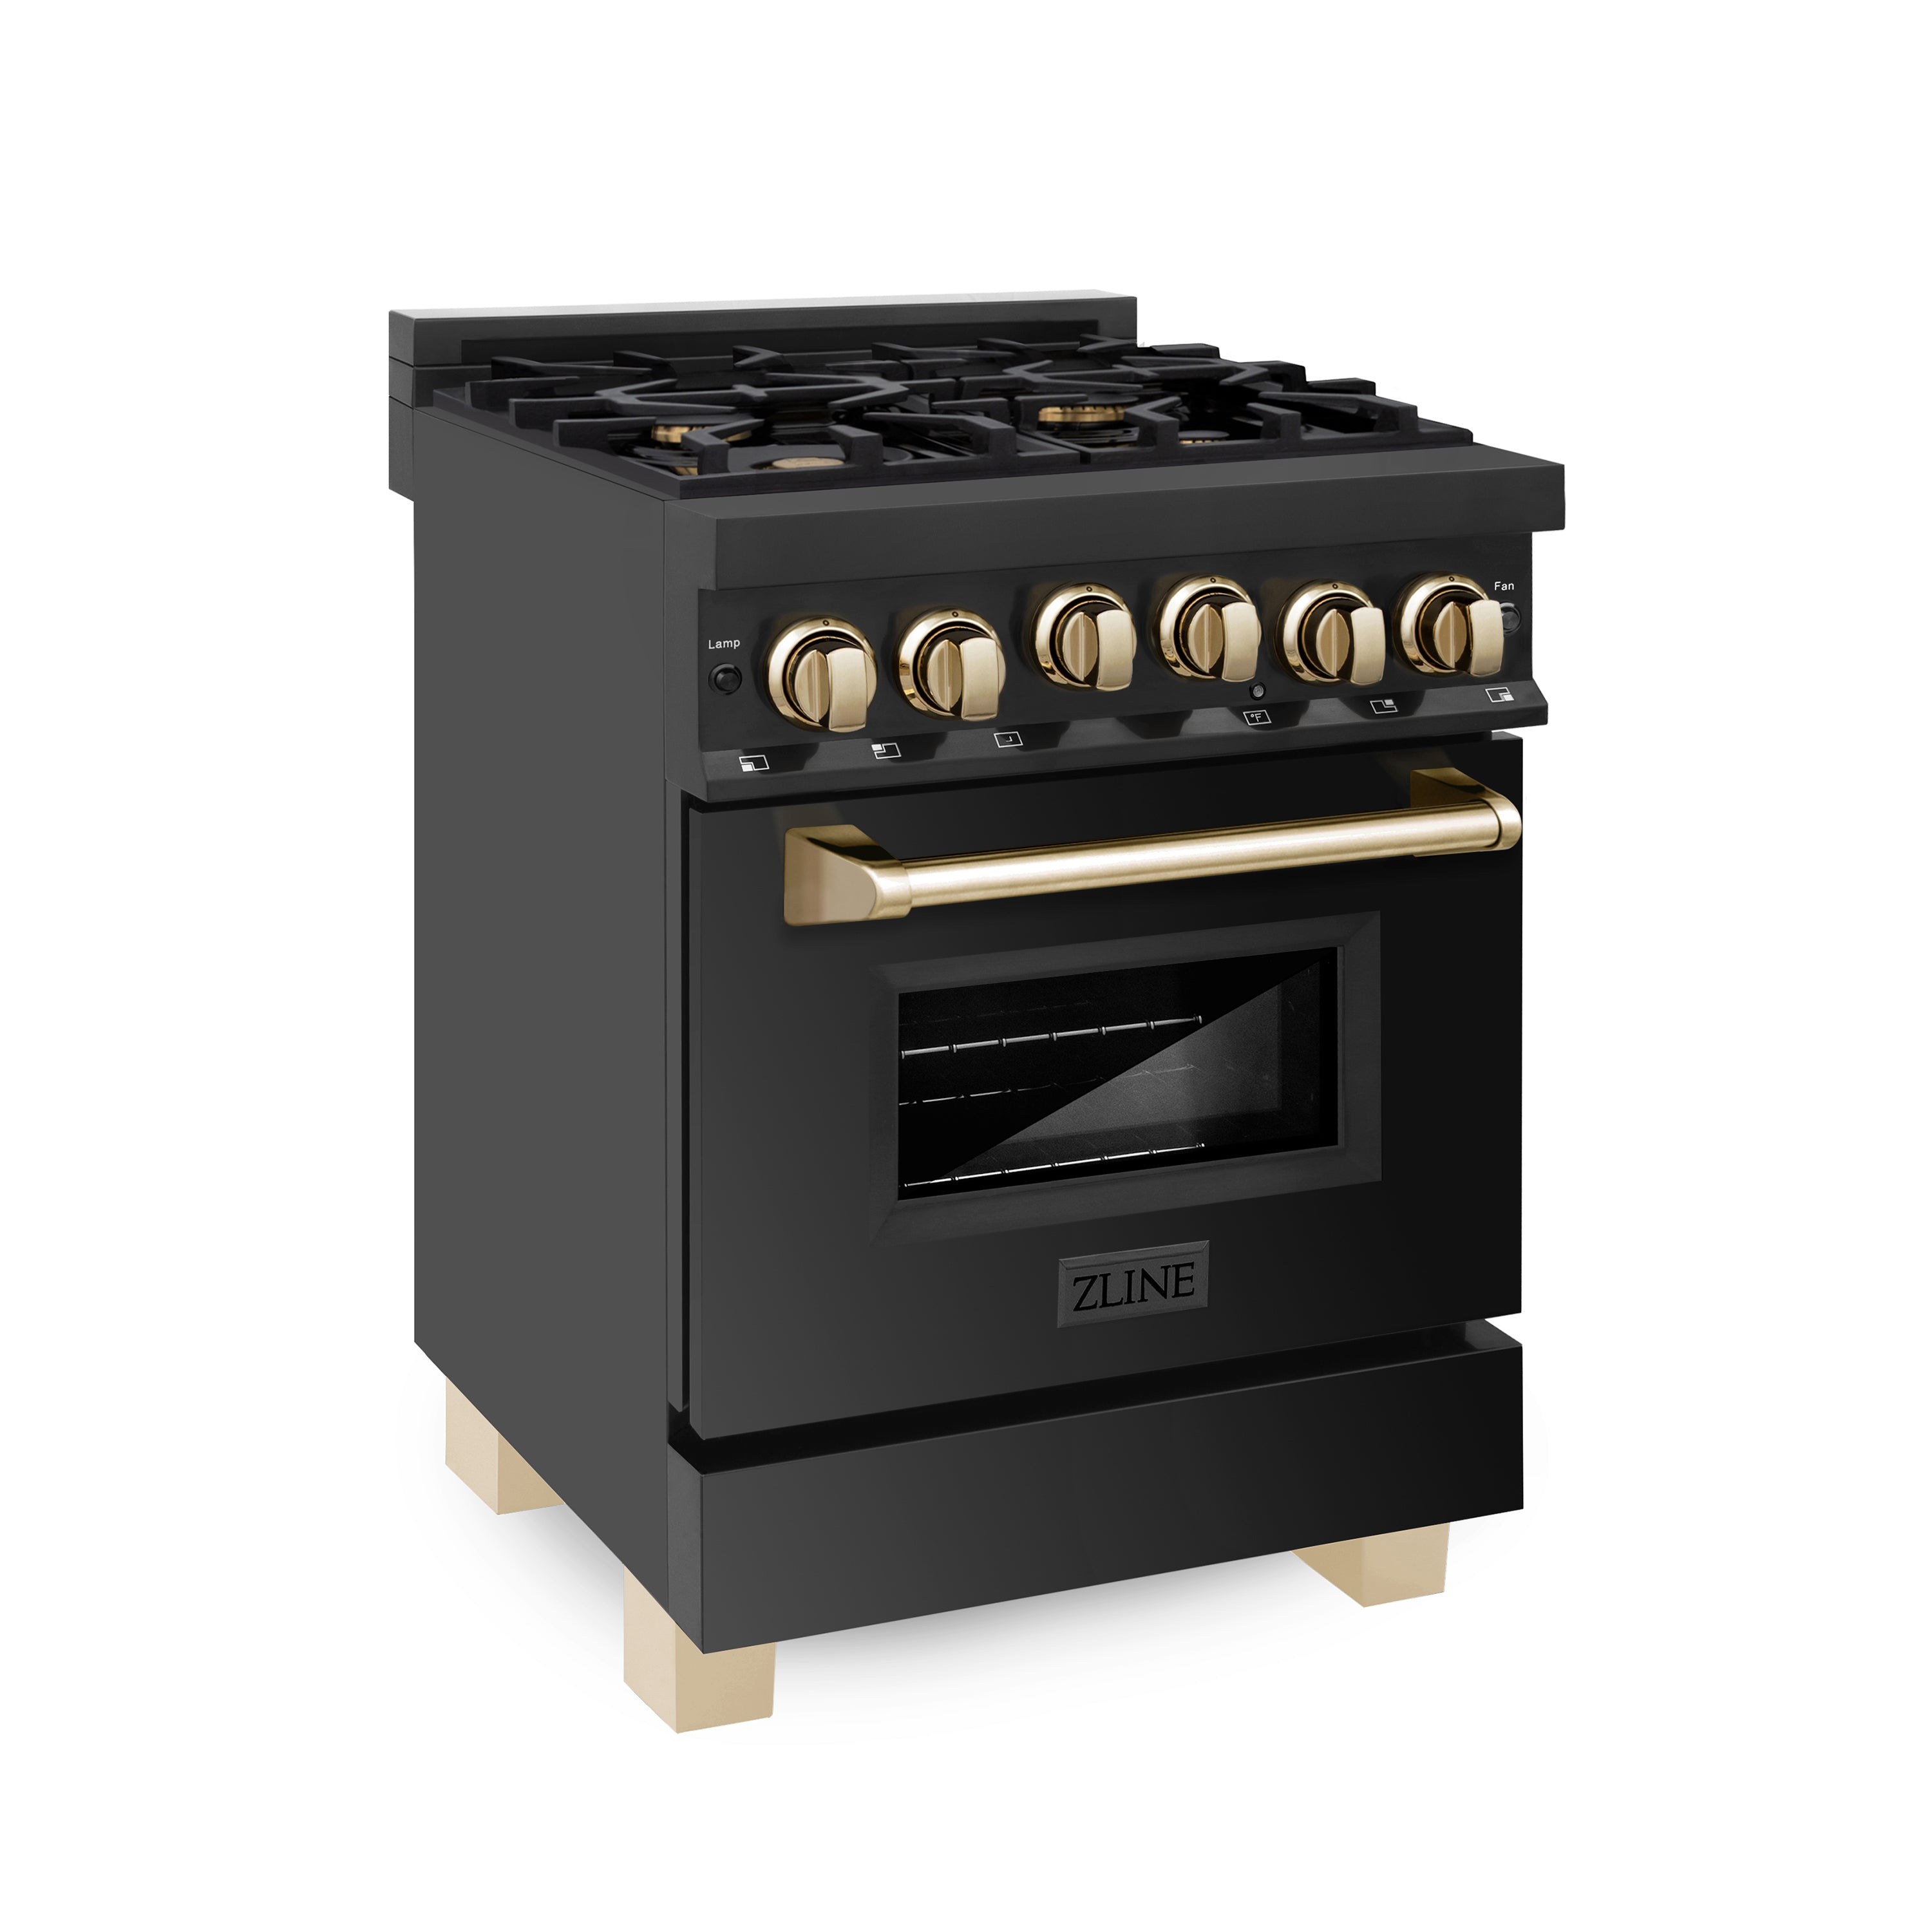 ZLINE Autograph Edition 24" 2.8 cu. ft. Range with Gas Stove and Gas Oven in Black Stainless Steel with Polished Gold Accents (RGBZ-24-G)